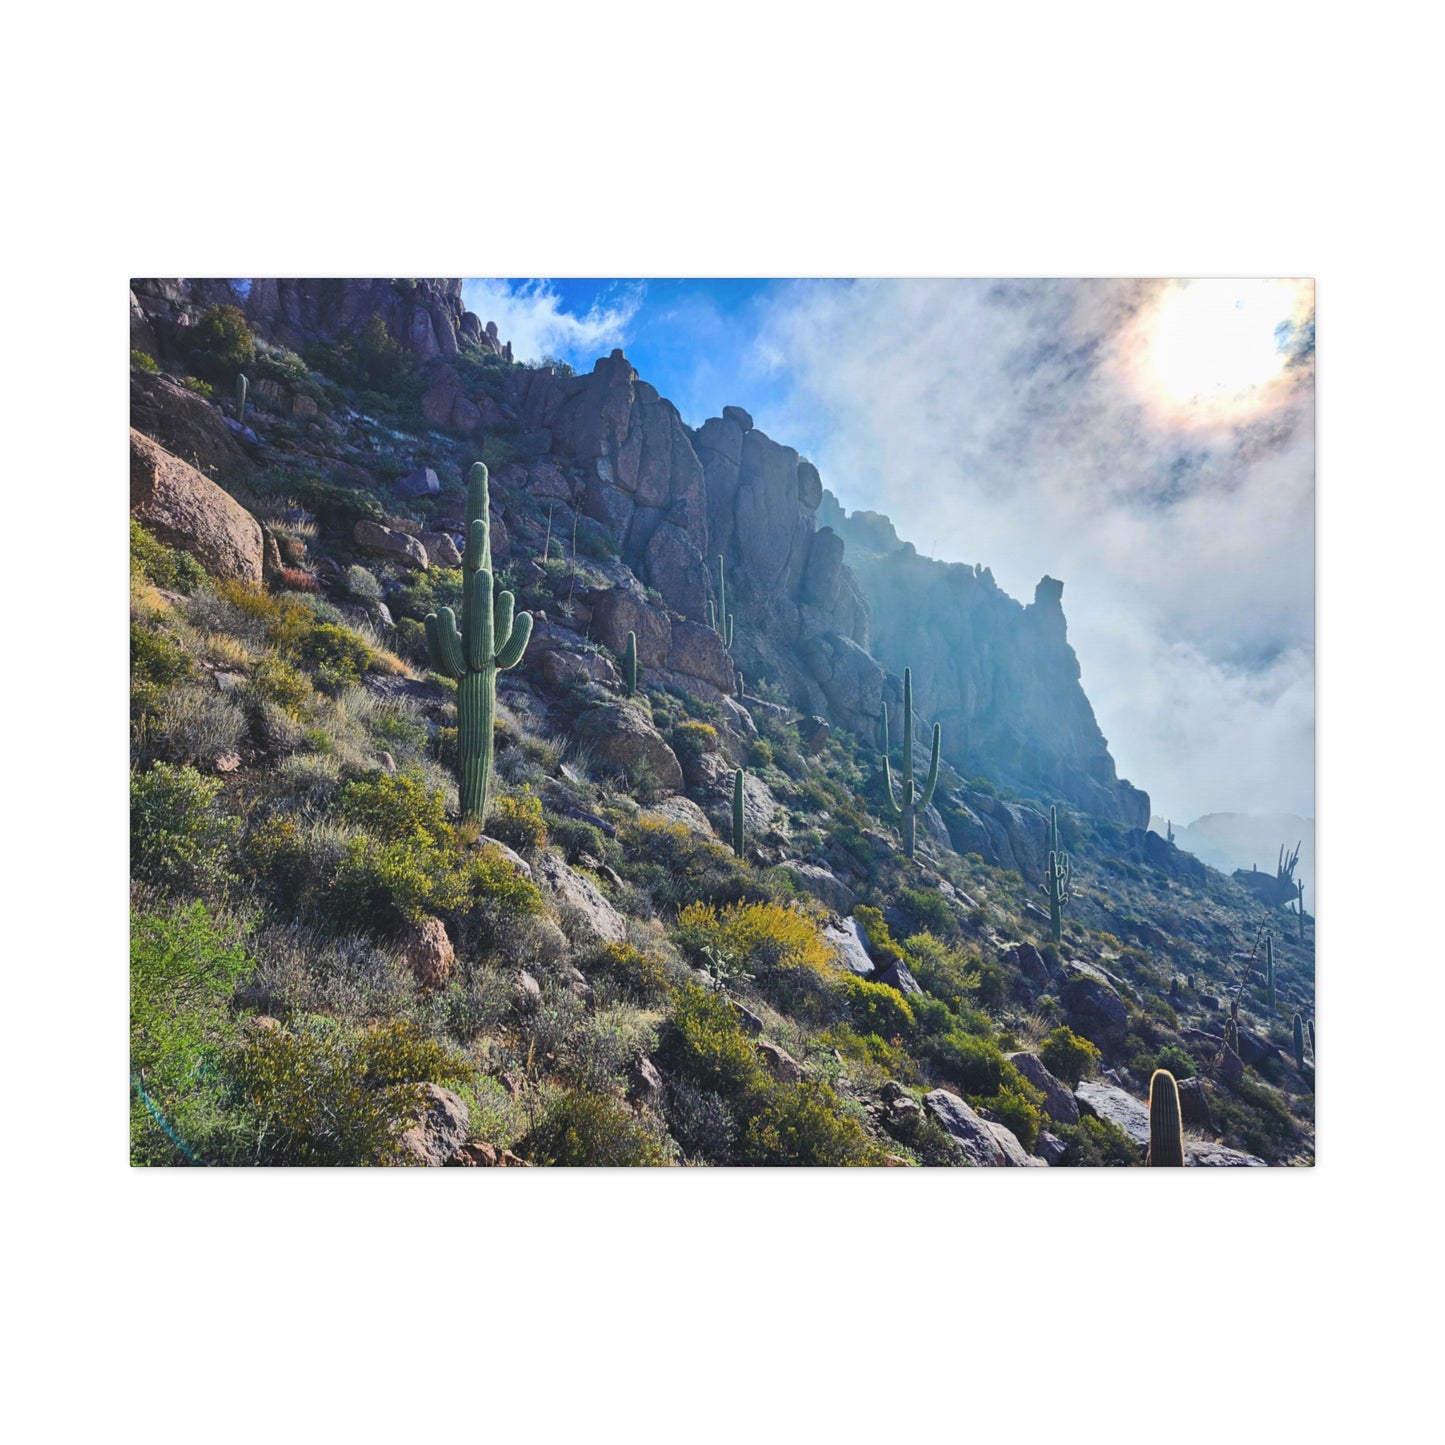 The Mystical Superstition Mountains; Arizona Photography, Wall Art, Natural Landscape Home Decor for Hikers and Nature Lovers!